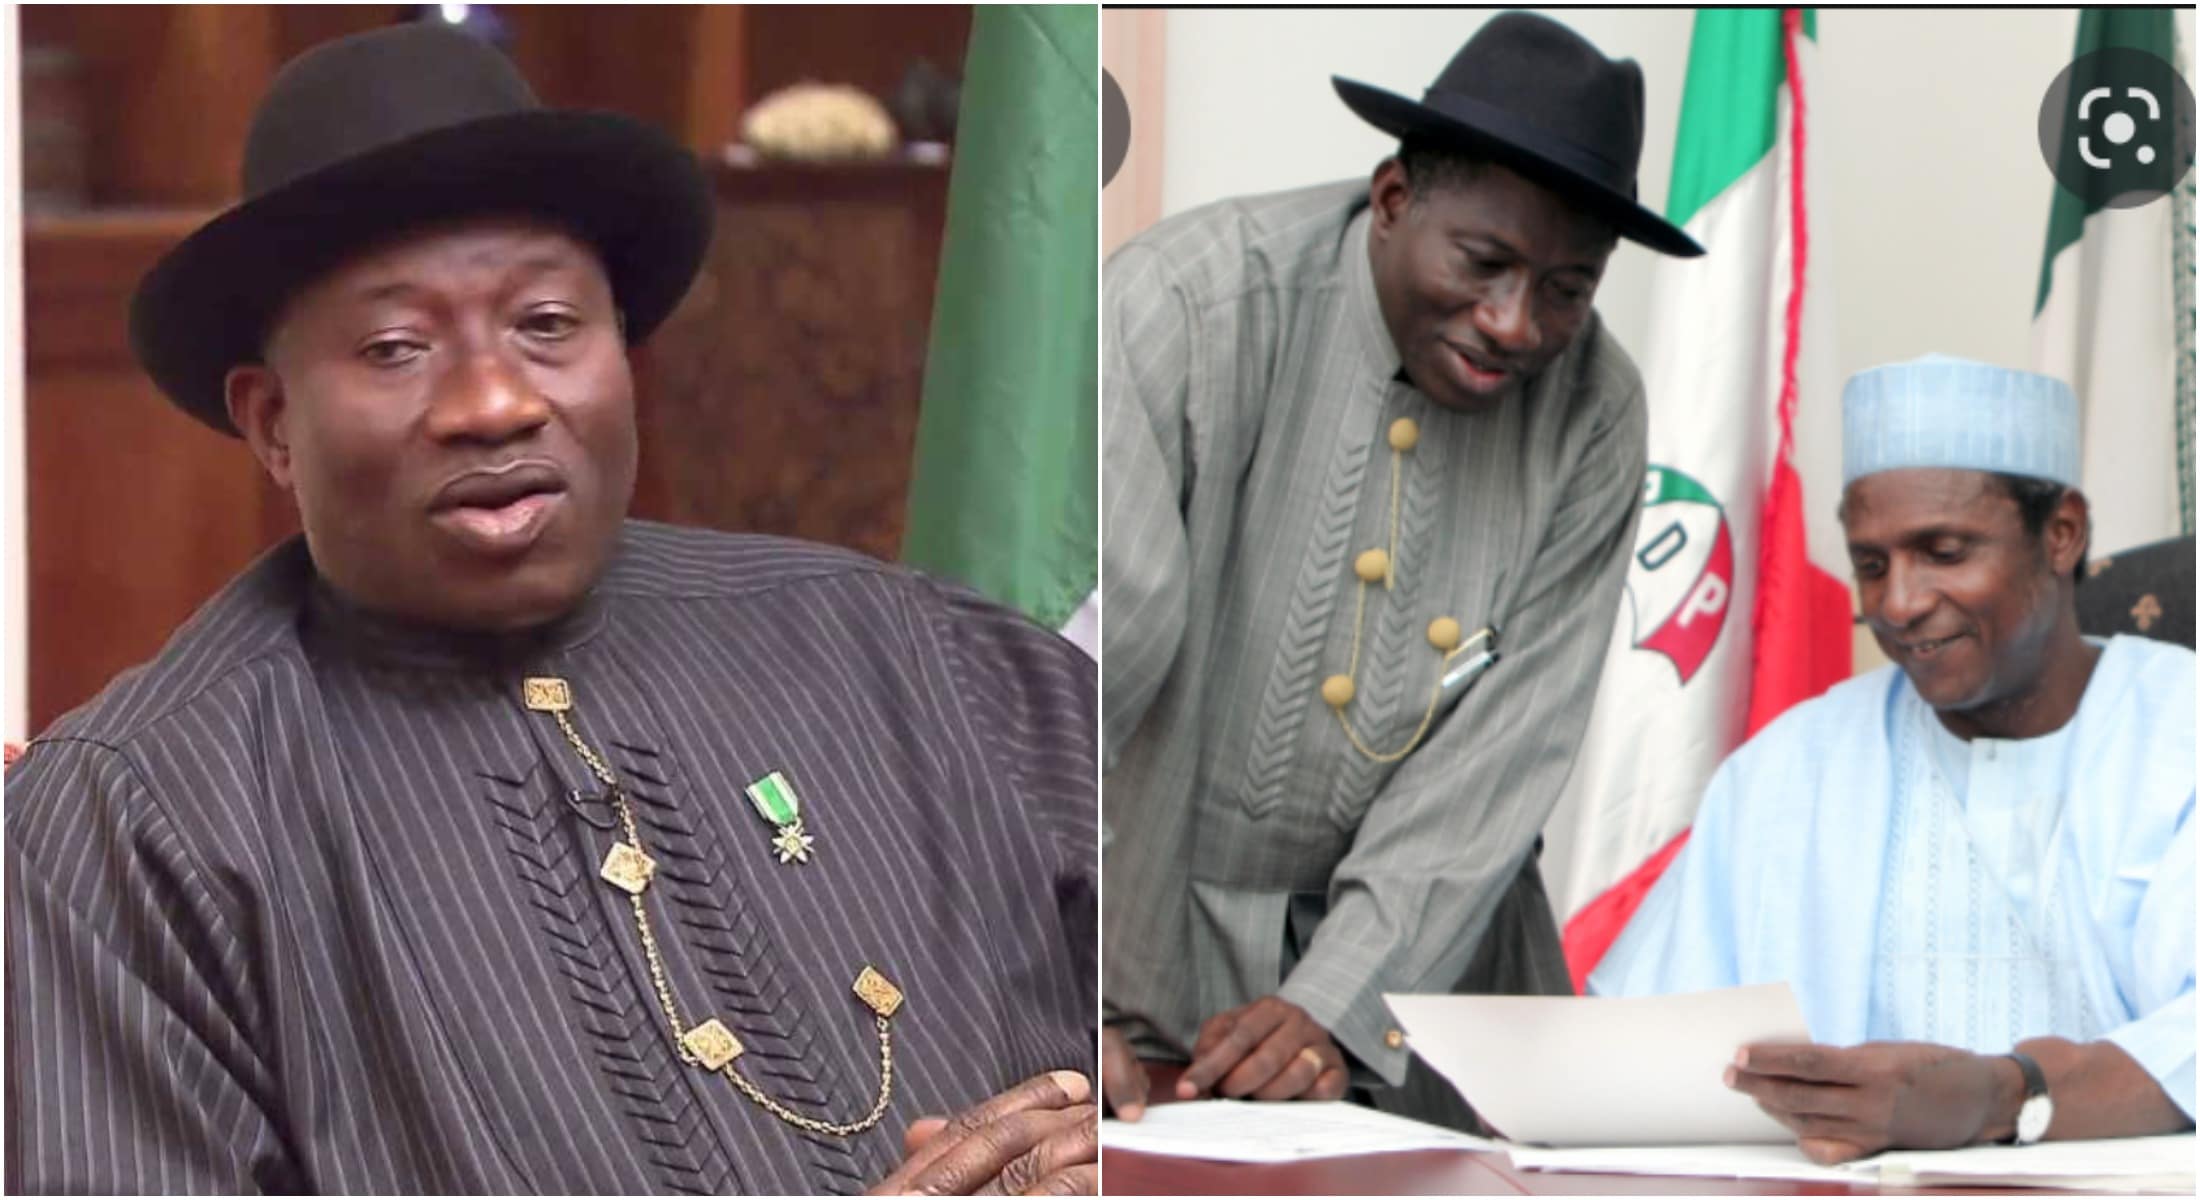 Latest Political News In Nigeria For Today, Thursday, 5th May, 2022